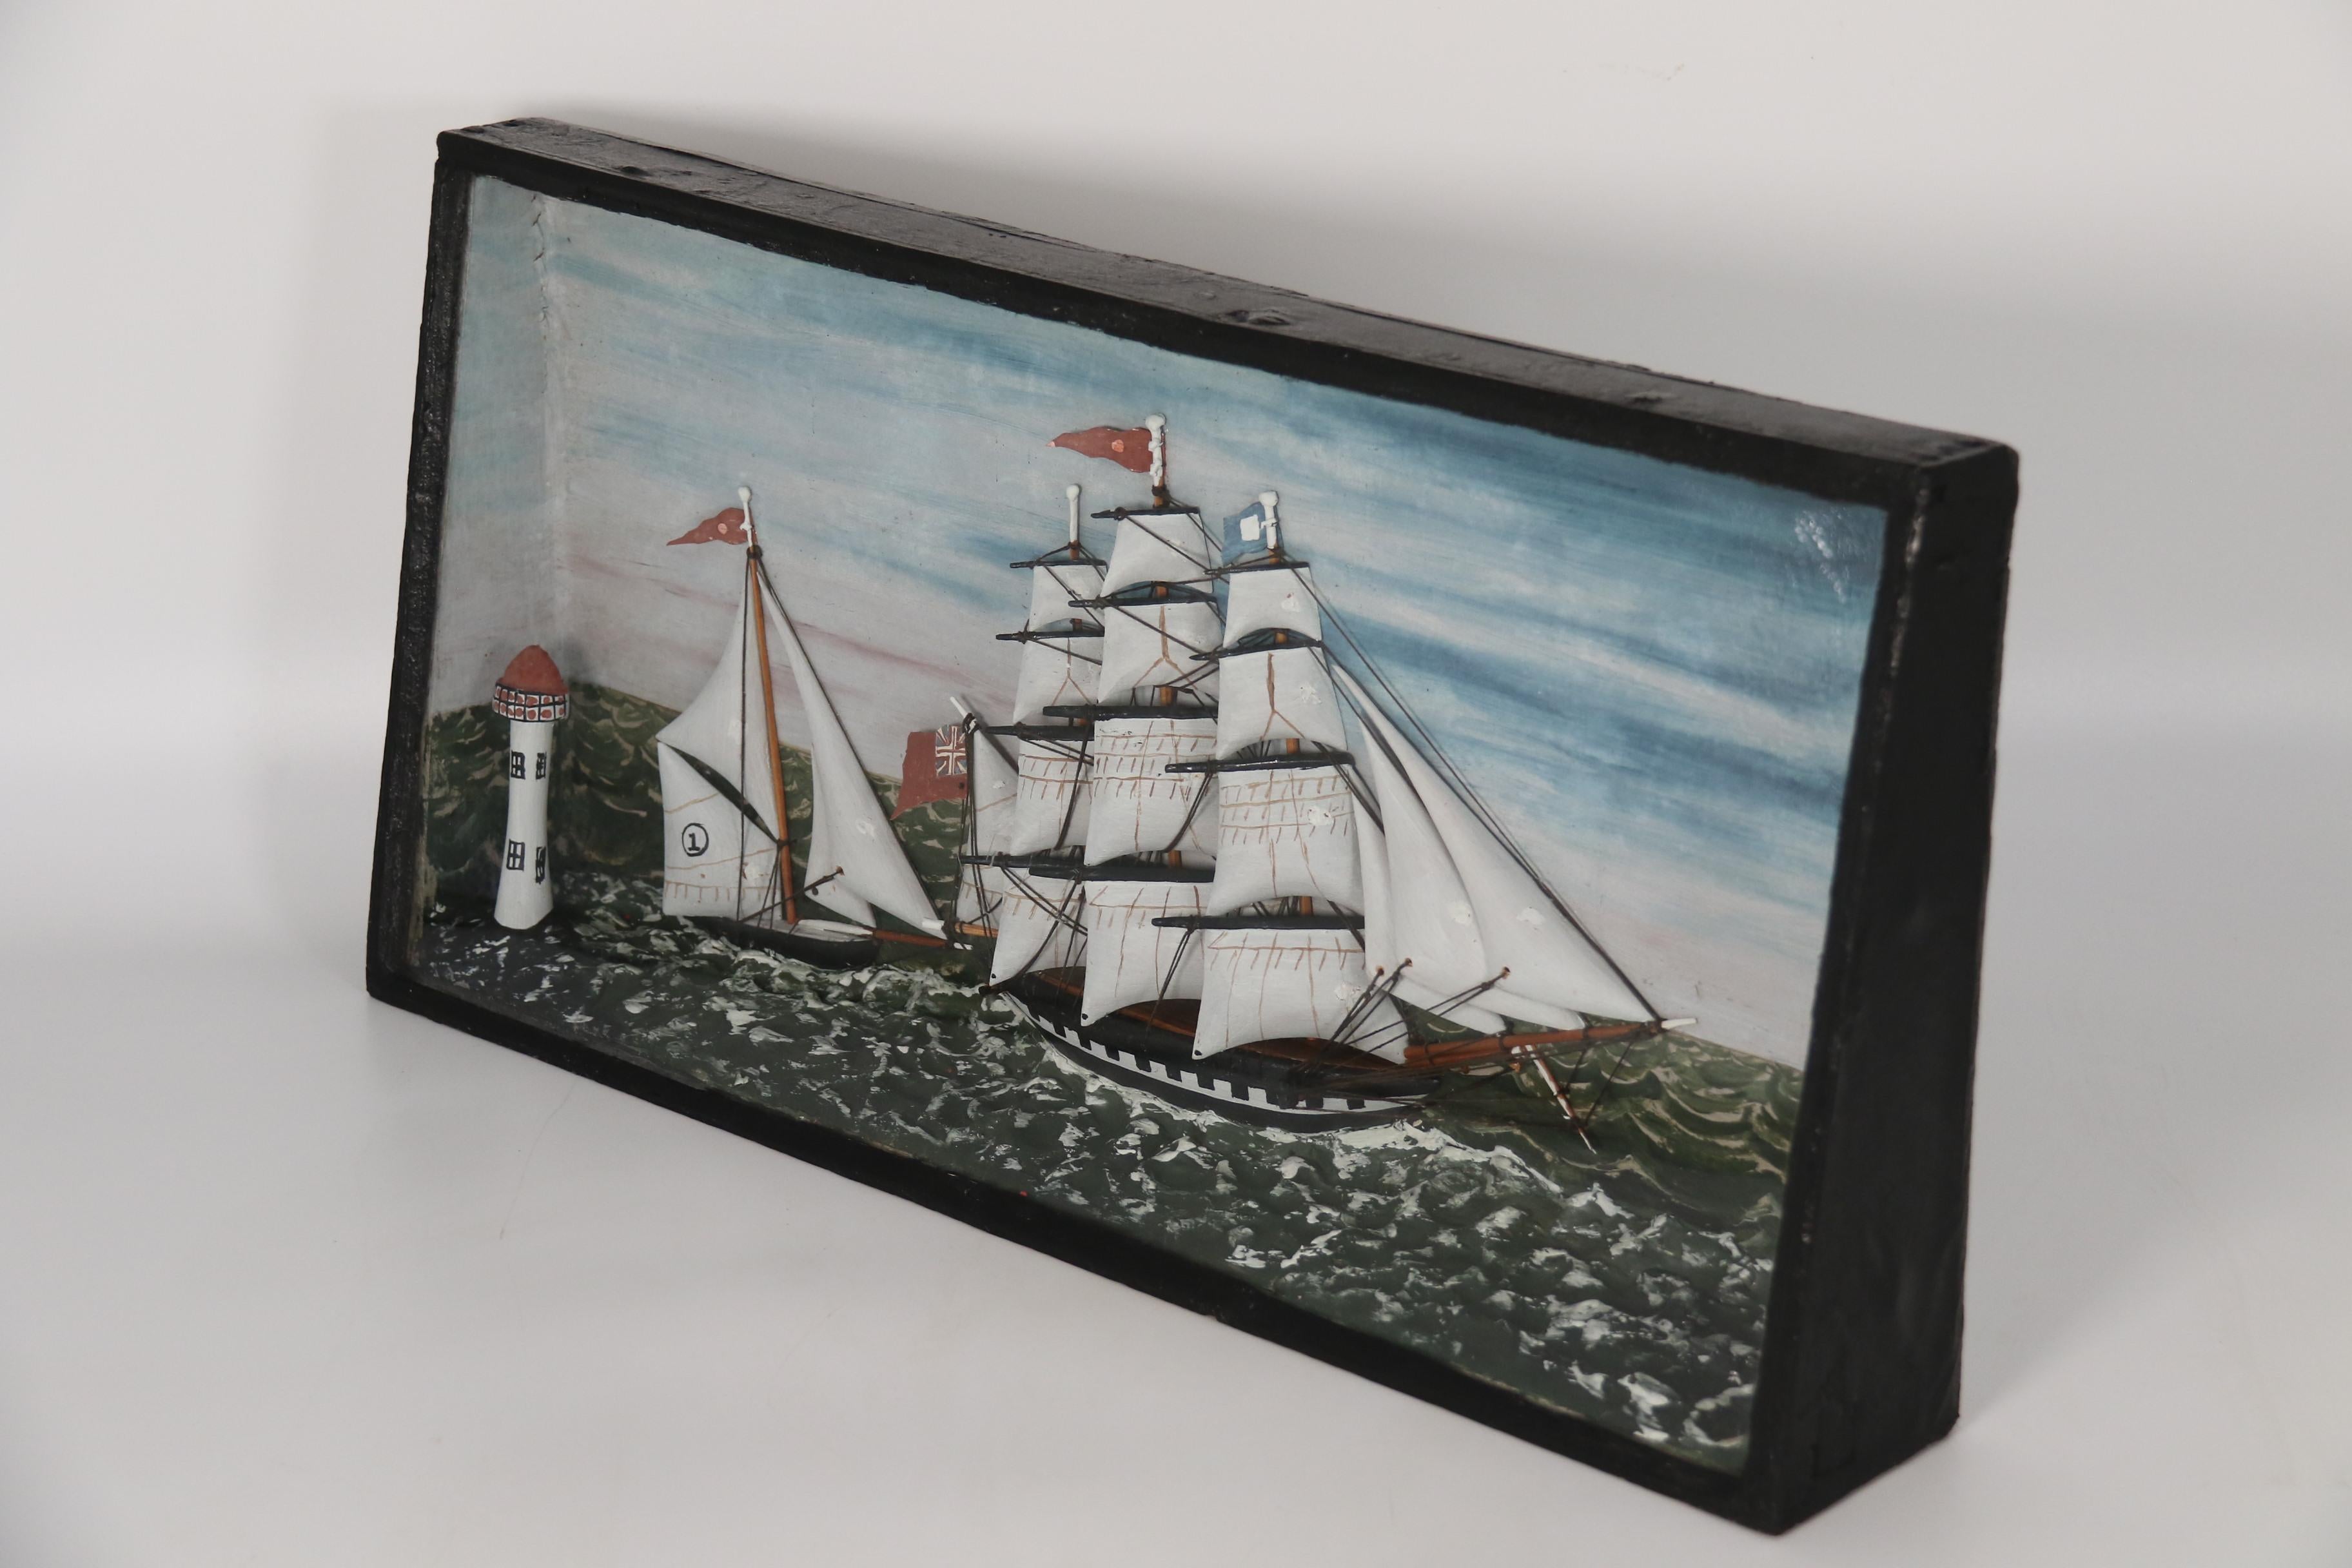 This most attractive mid 19th century folk art cased diorama shows a view at sea with a large three mast English ship being chased in a racing situation by a smaller and faster single mast yacht. Both are passing by a lighthouse which is in the